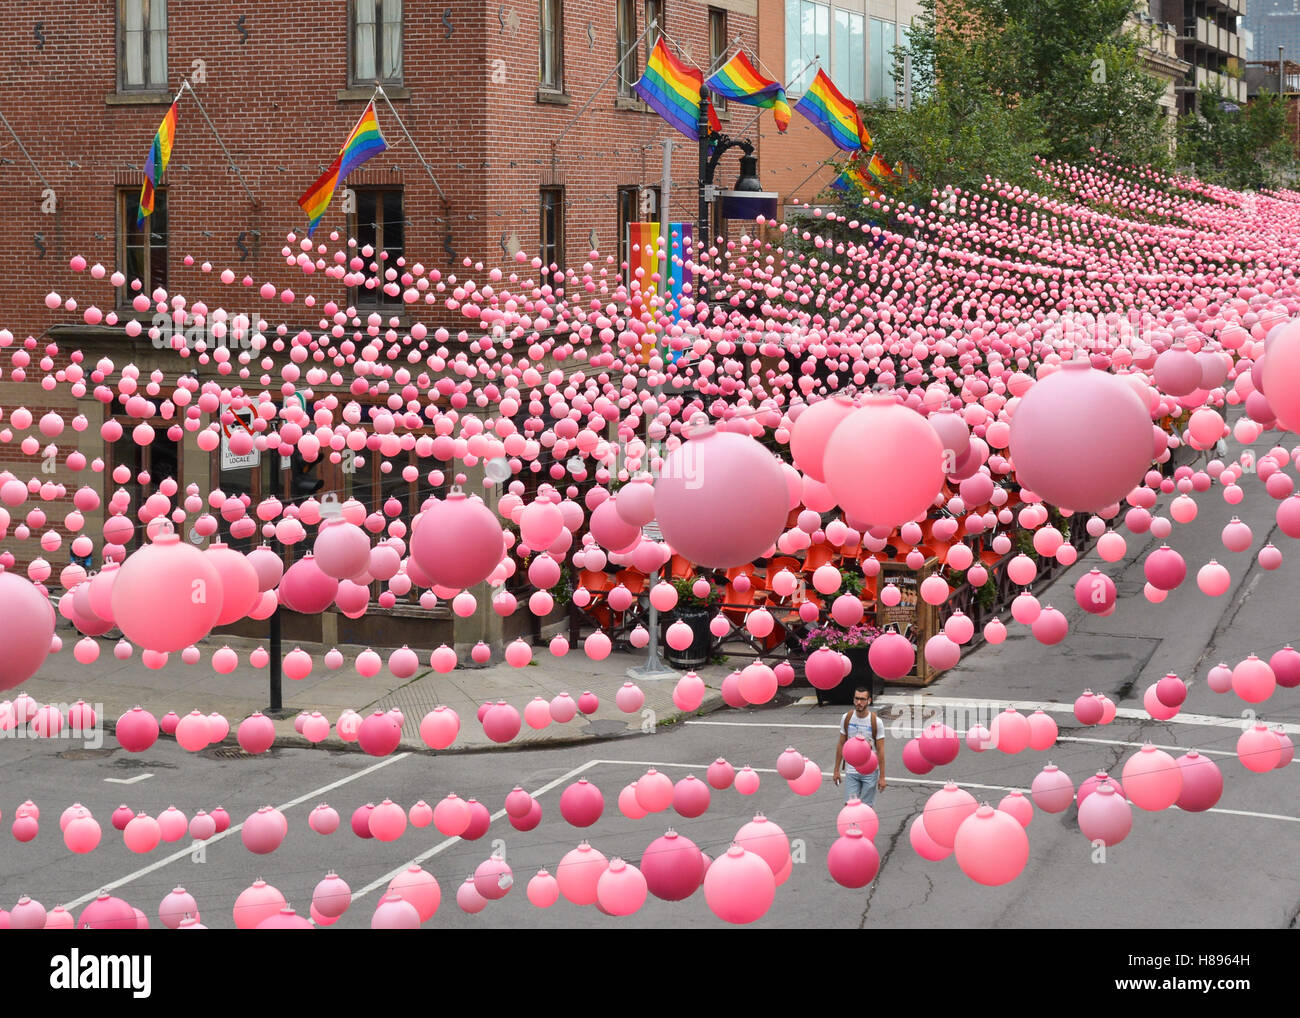 Montreal gay village - Sainte-Catherine Street 'pink balls' (Le Projet de Boules Roses), Montreal, Canada Stock Photo